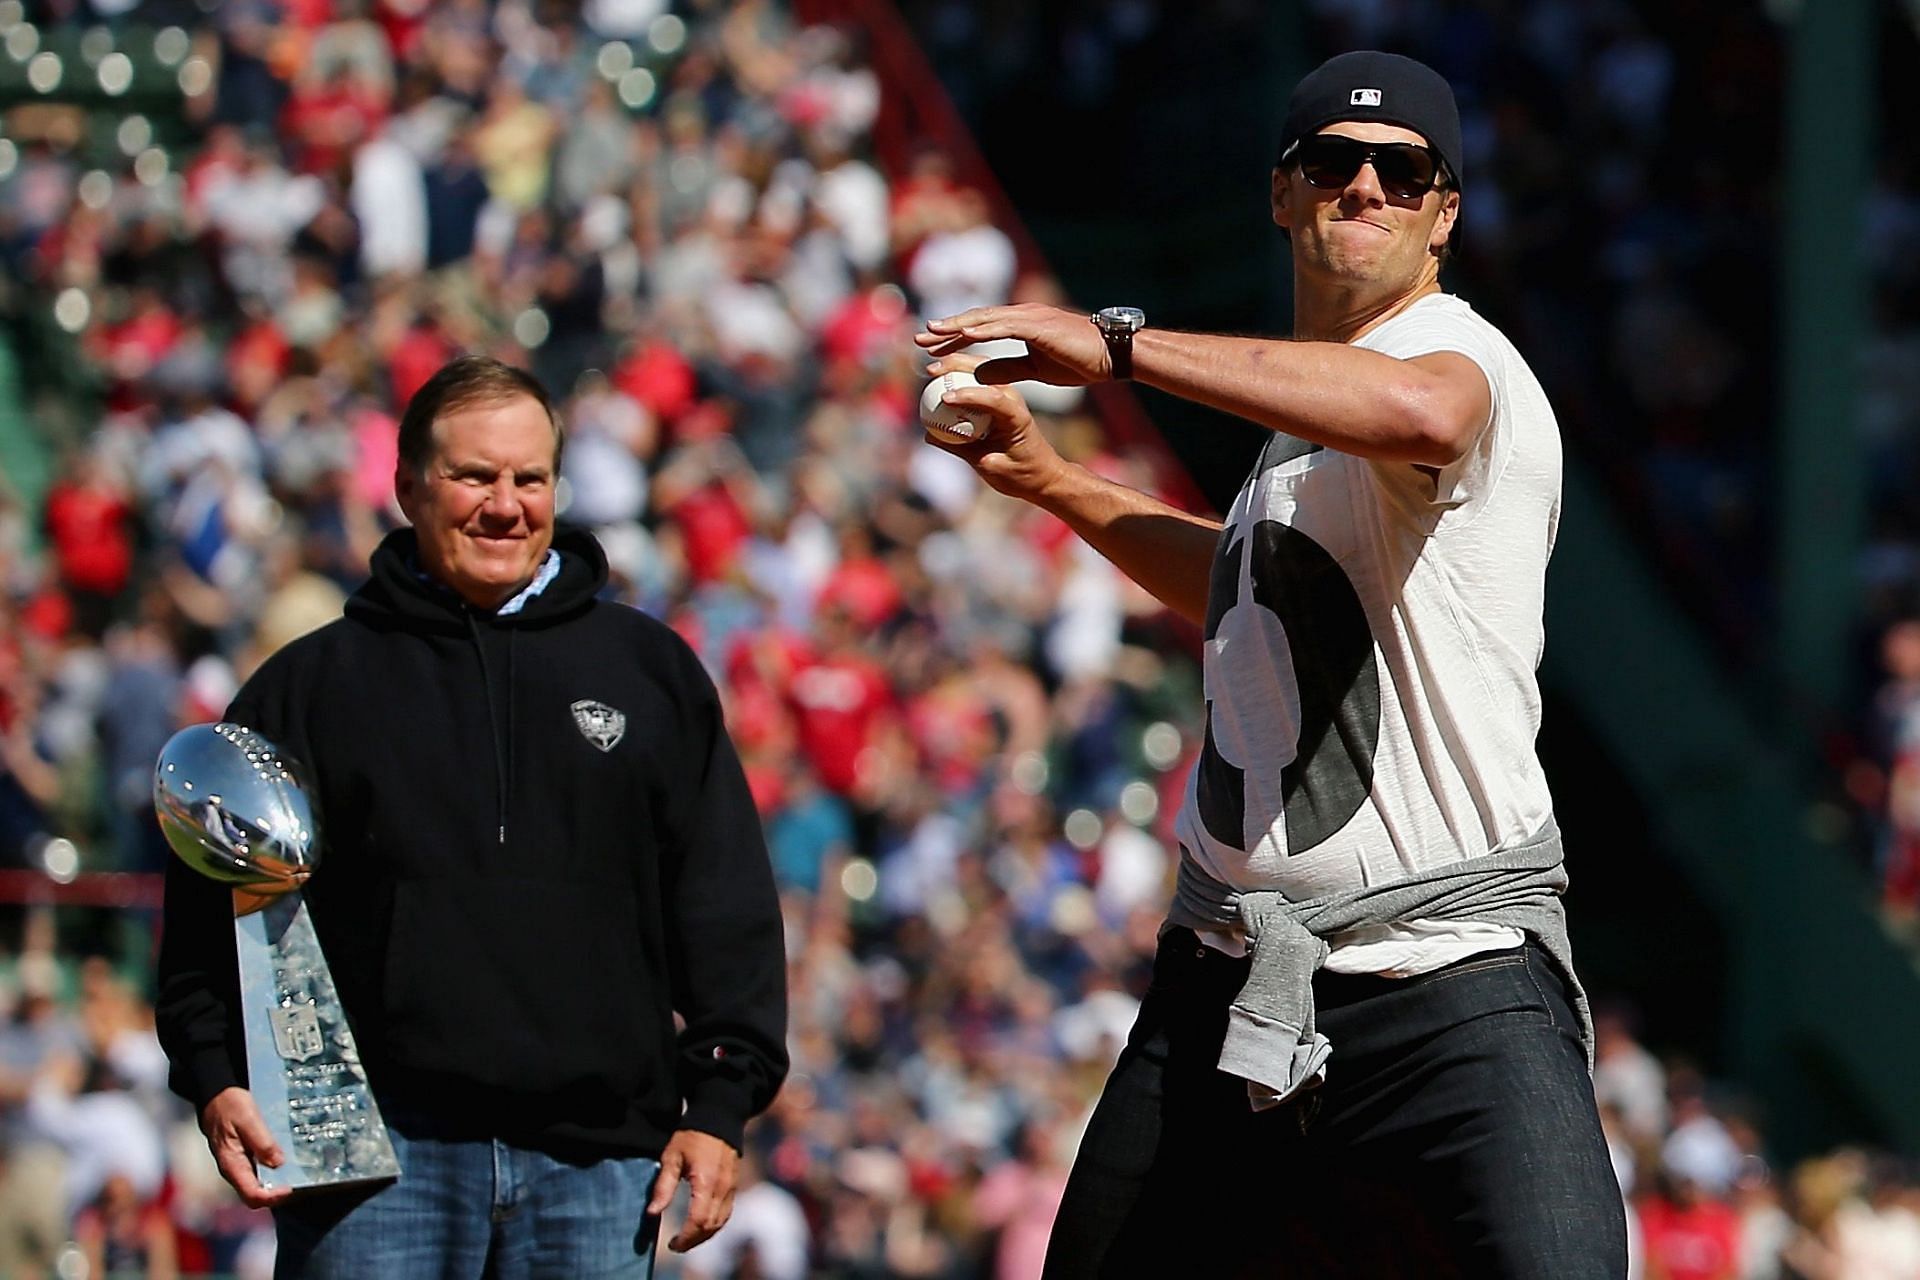 Tom Brady throwing out the first pitch.